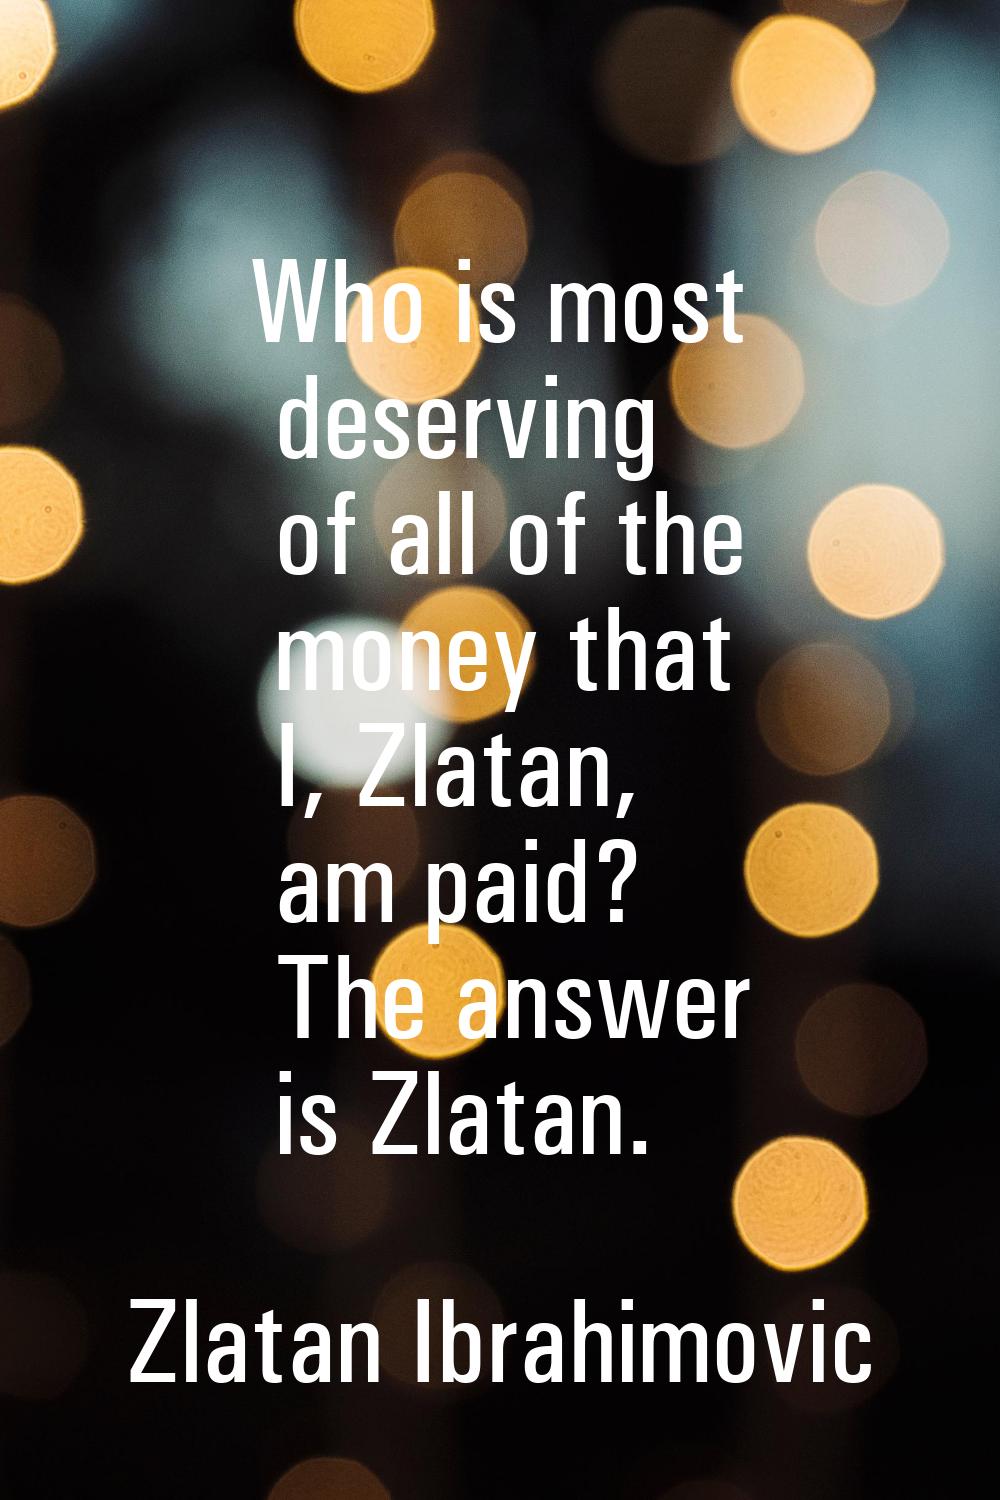 Who is most deserving of all of the money that I, Zlatan, am paid? The answer is Zlatan.